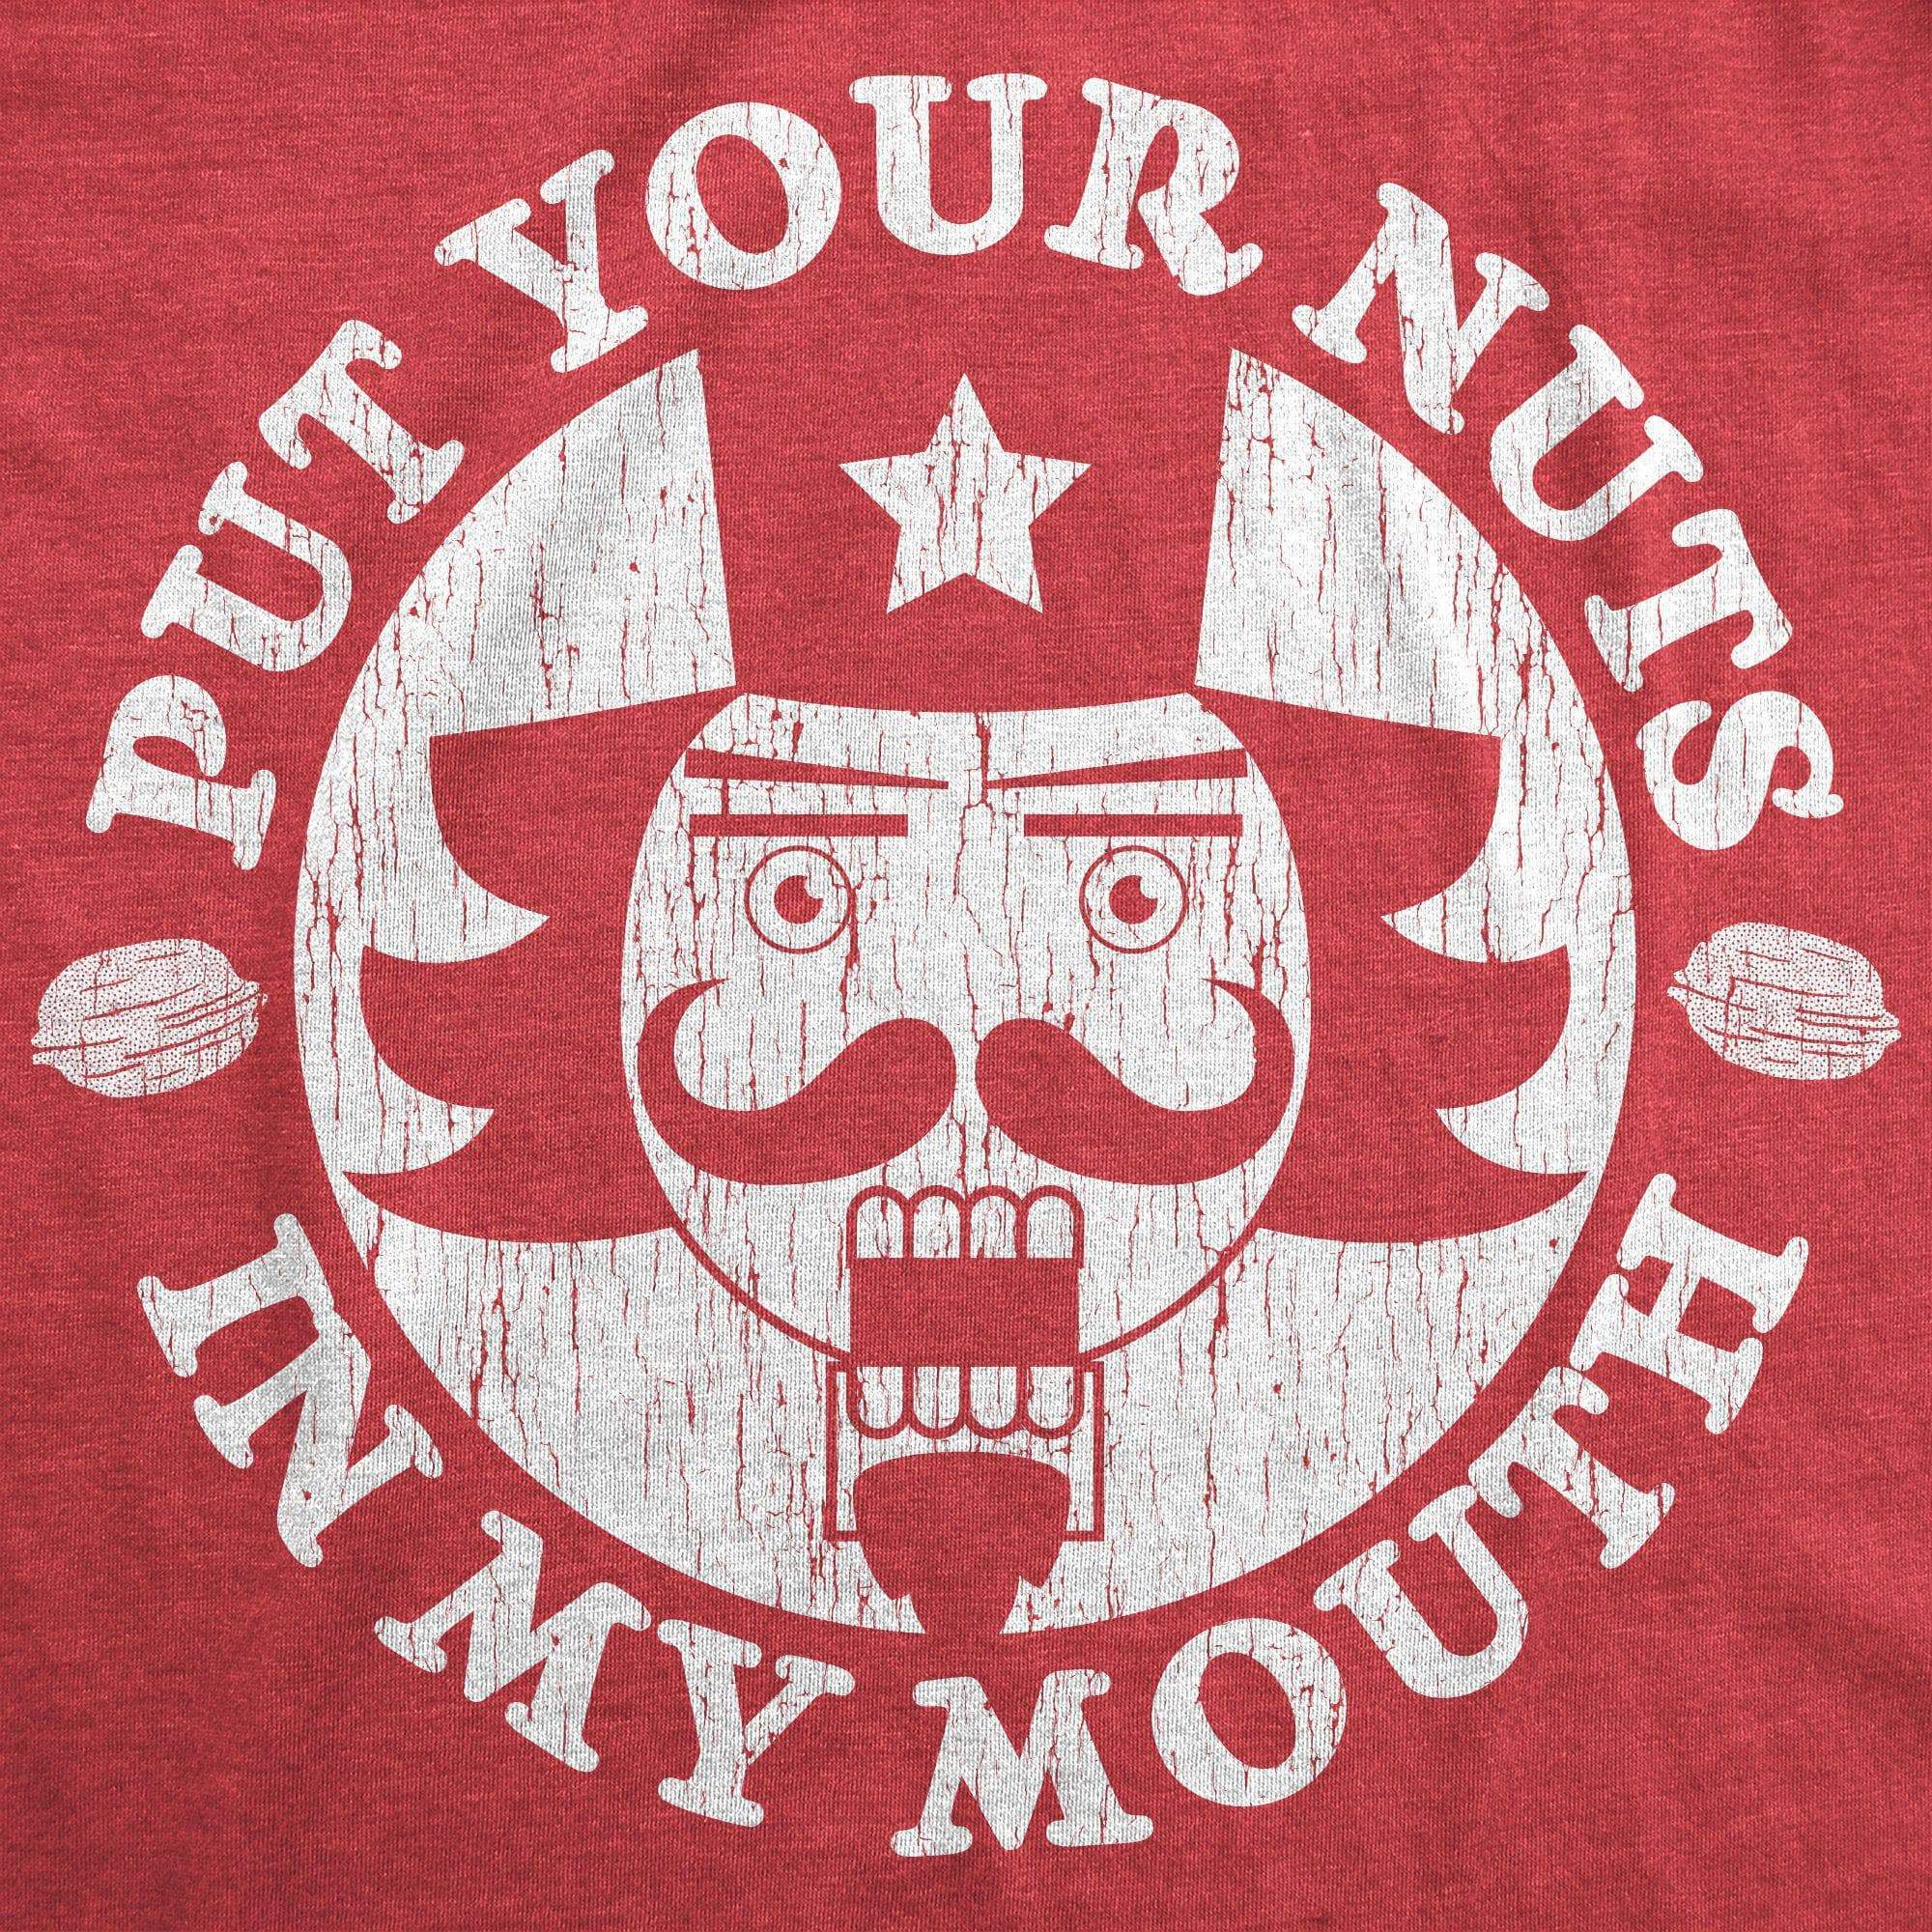 Put Your Nuts In My Mouth Men's Tshirt - Crazy Dog T-Shirts